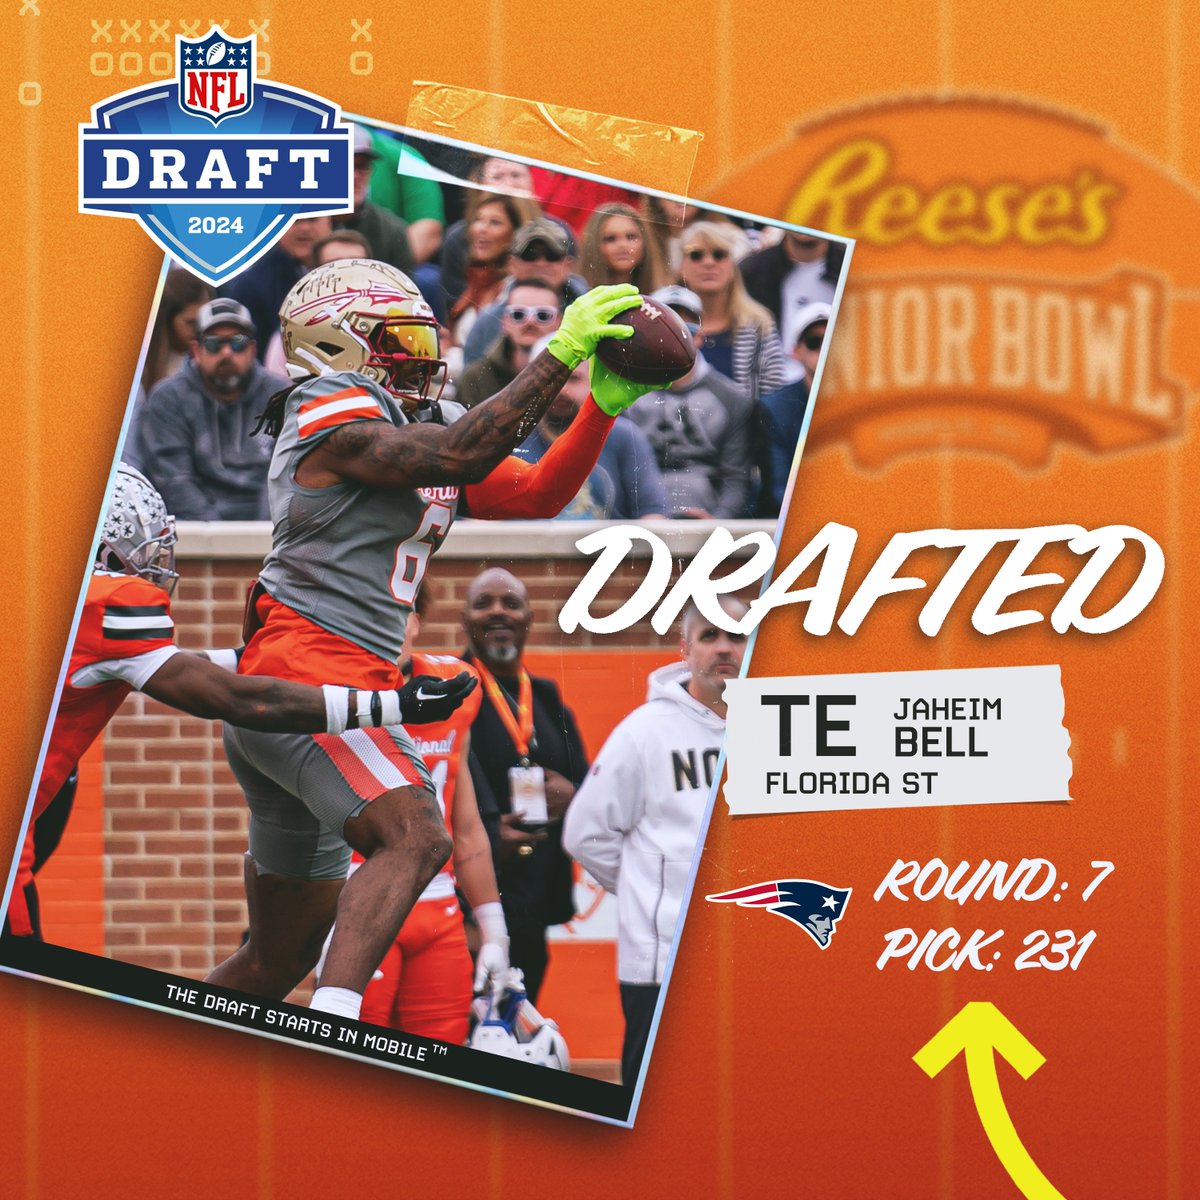 #NFLDraft The @Patriots have selected Senior Bowl alum @dba_bell out of @FSUFootball. Congratulations! #ForeverNE #TheDraftStartsInMOBILE™️